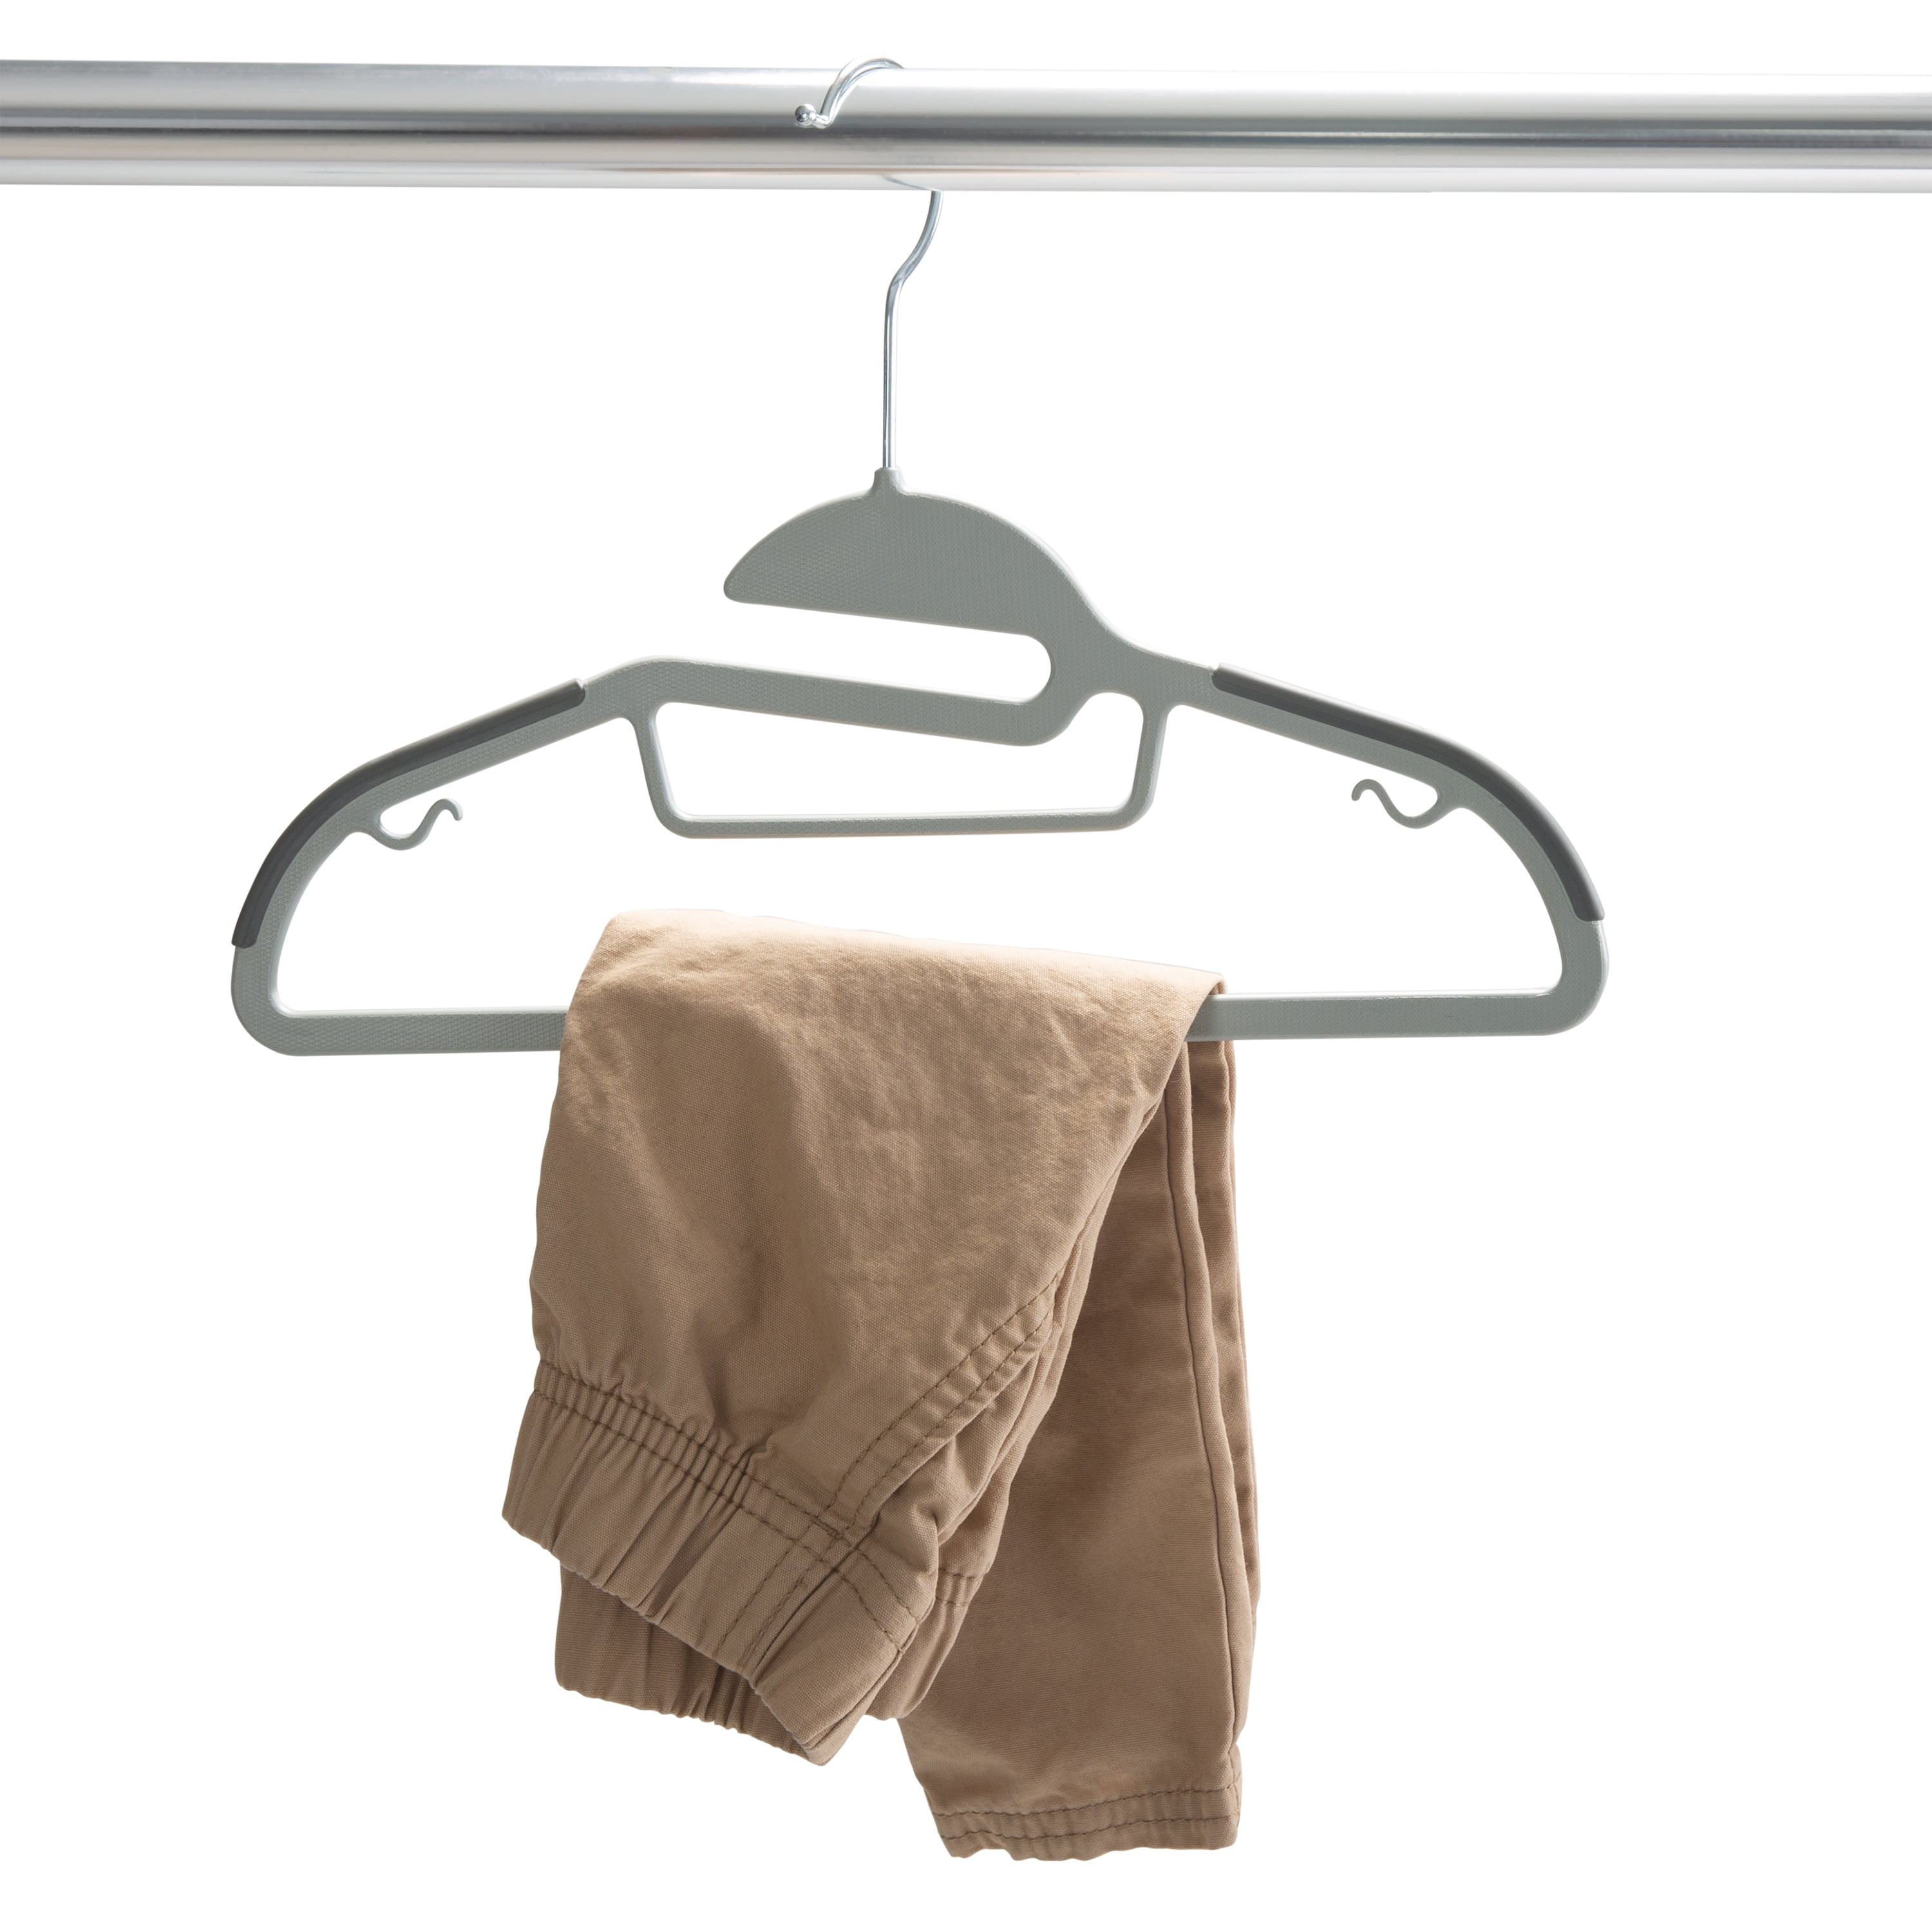 SAY GOODBYE TO CLOTHES MOTHS WITH THESE 4 NATURAL SOLUTIONS! – Only Hangers  Inc.